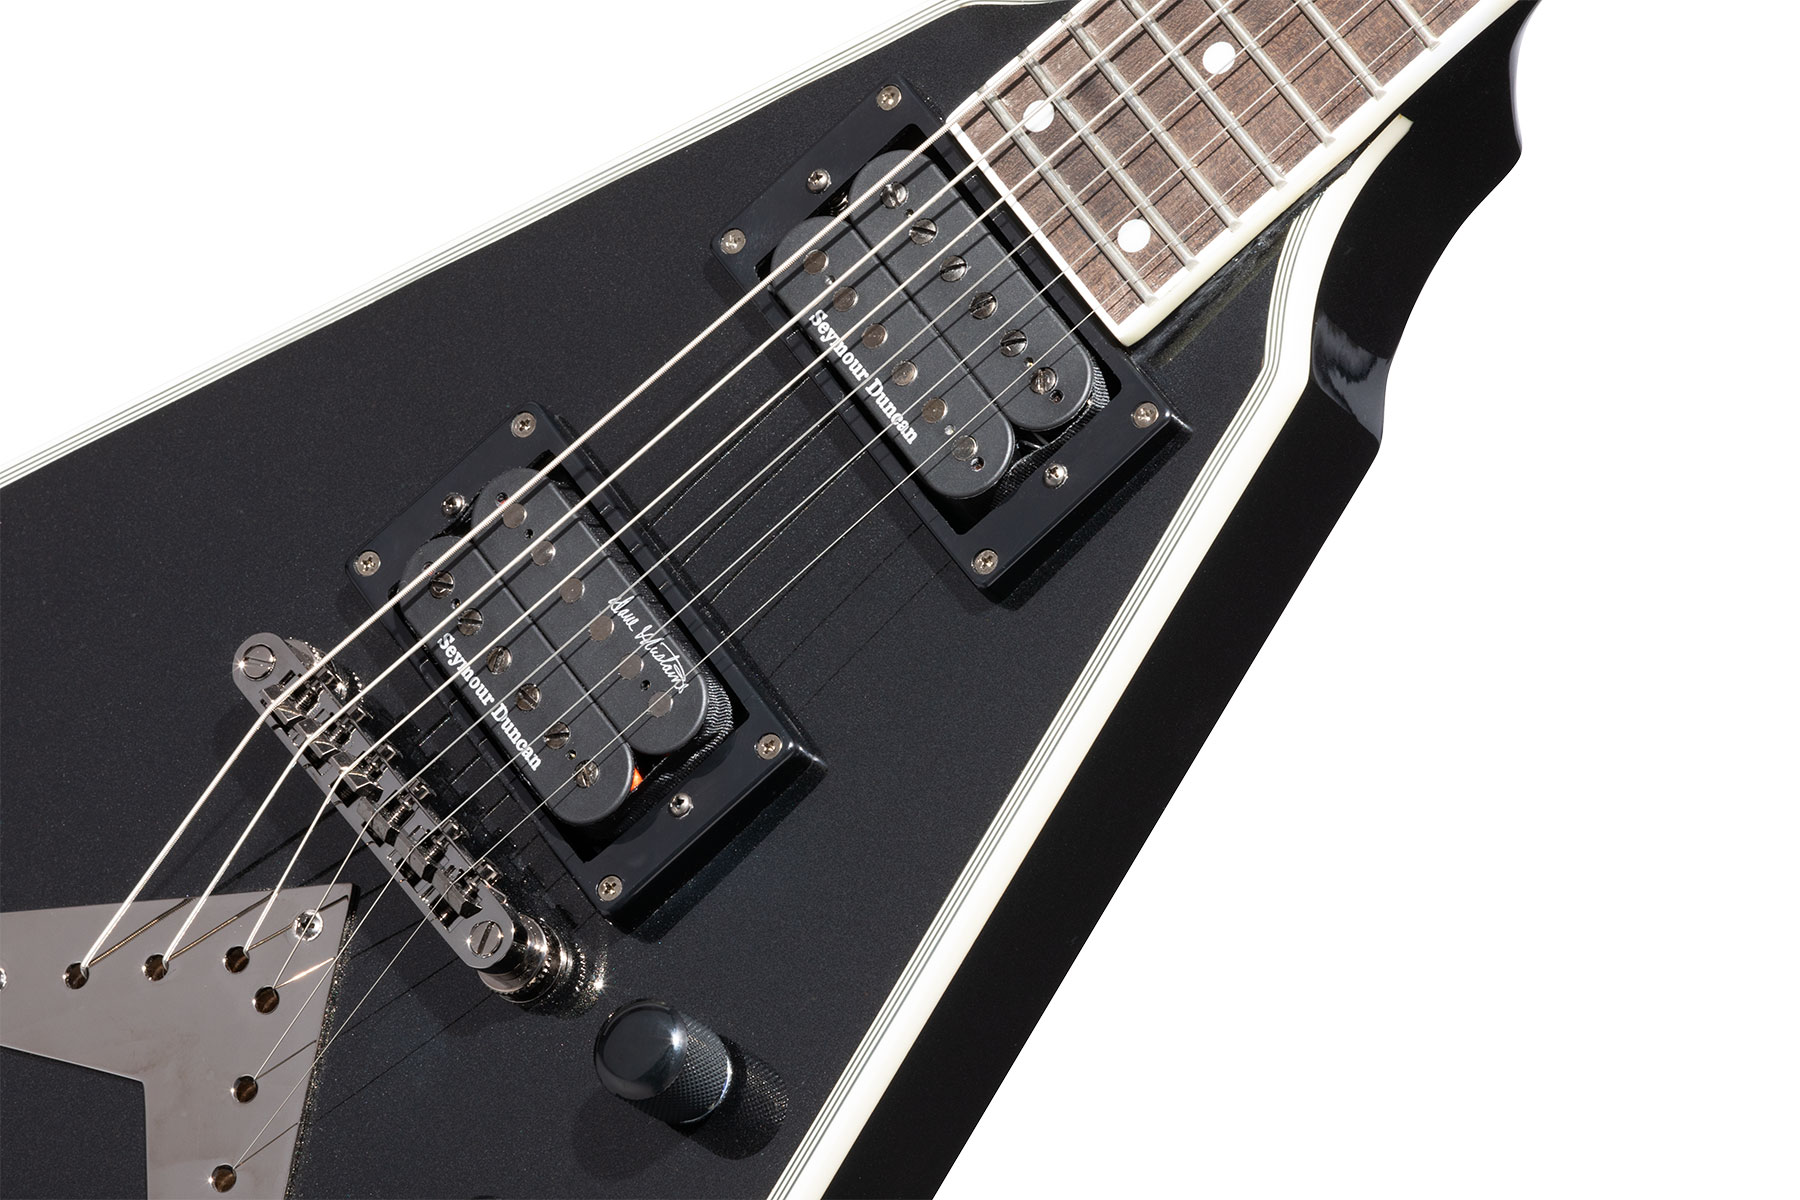 Epiphone Dave Mustaine Flying V Prophecy 2h Fishman Fluence Ht Eb - Black Metallic - Metal electric guitar - Variation 4